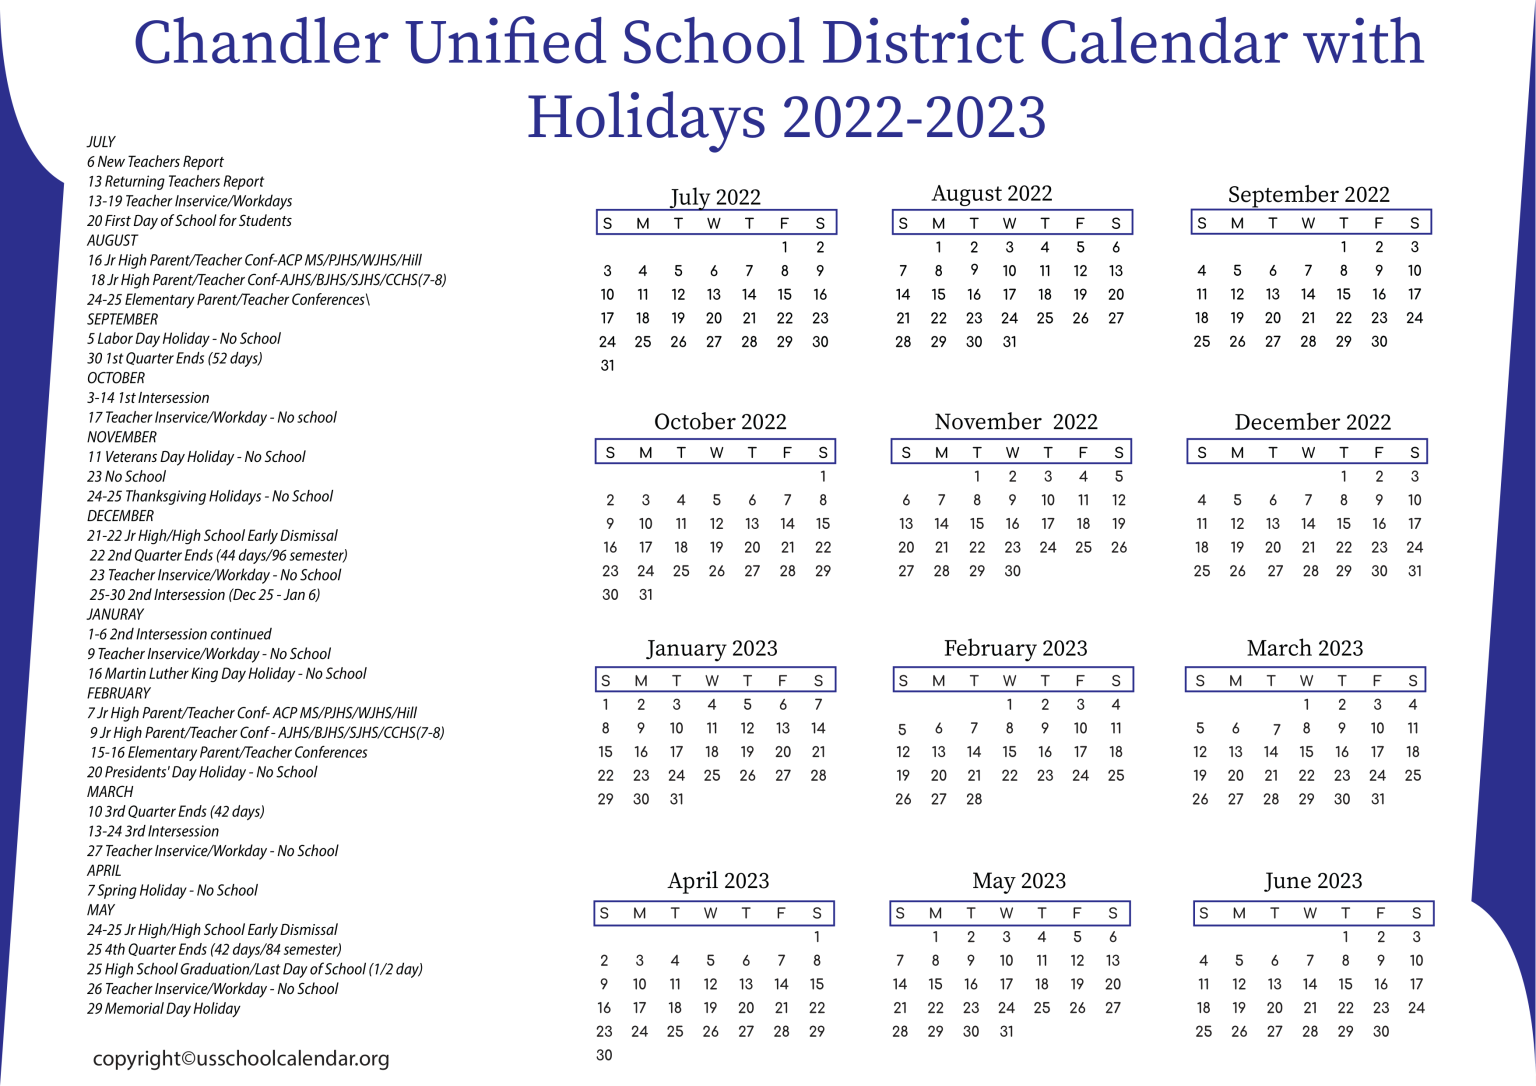 Chandler Unified School District Calendar with Holidays 2023